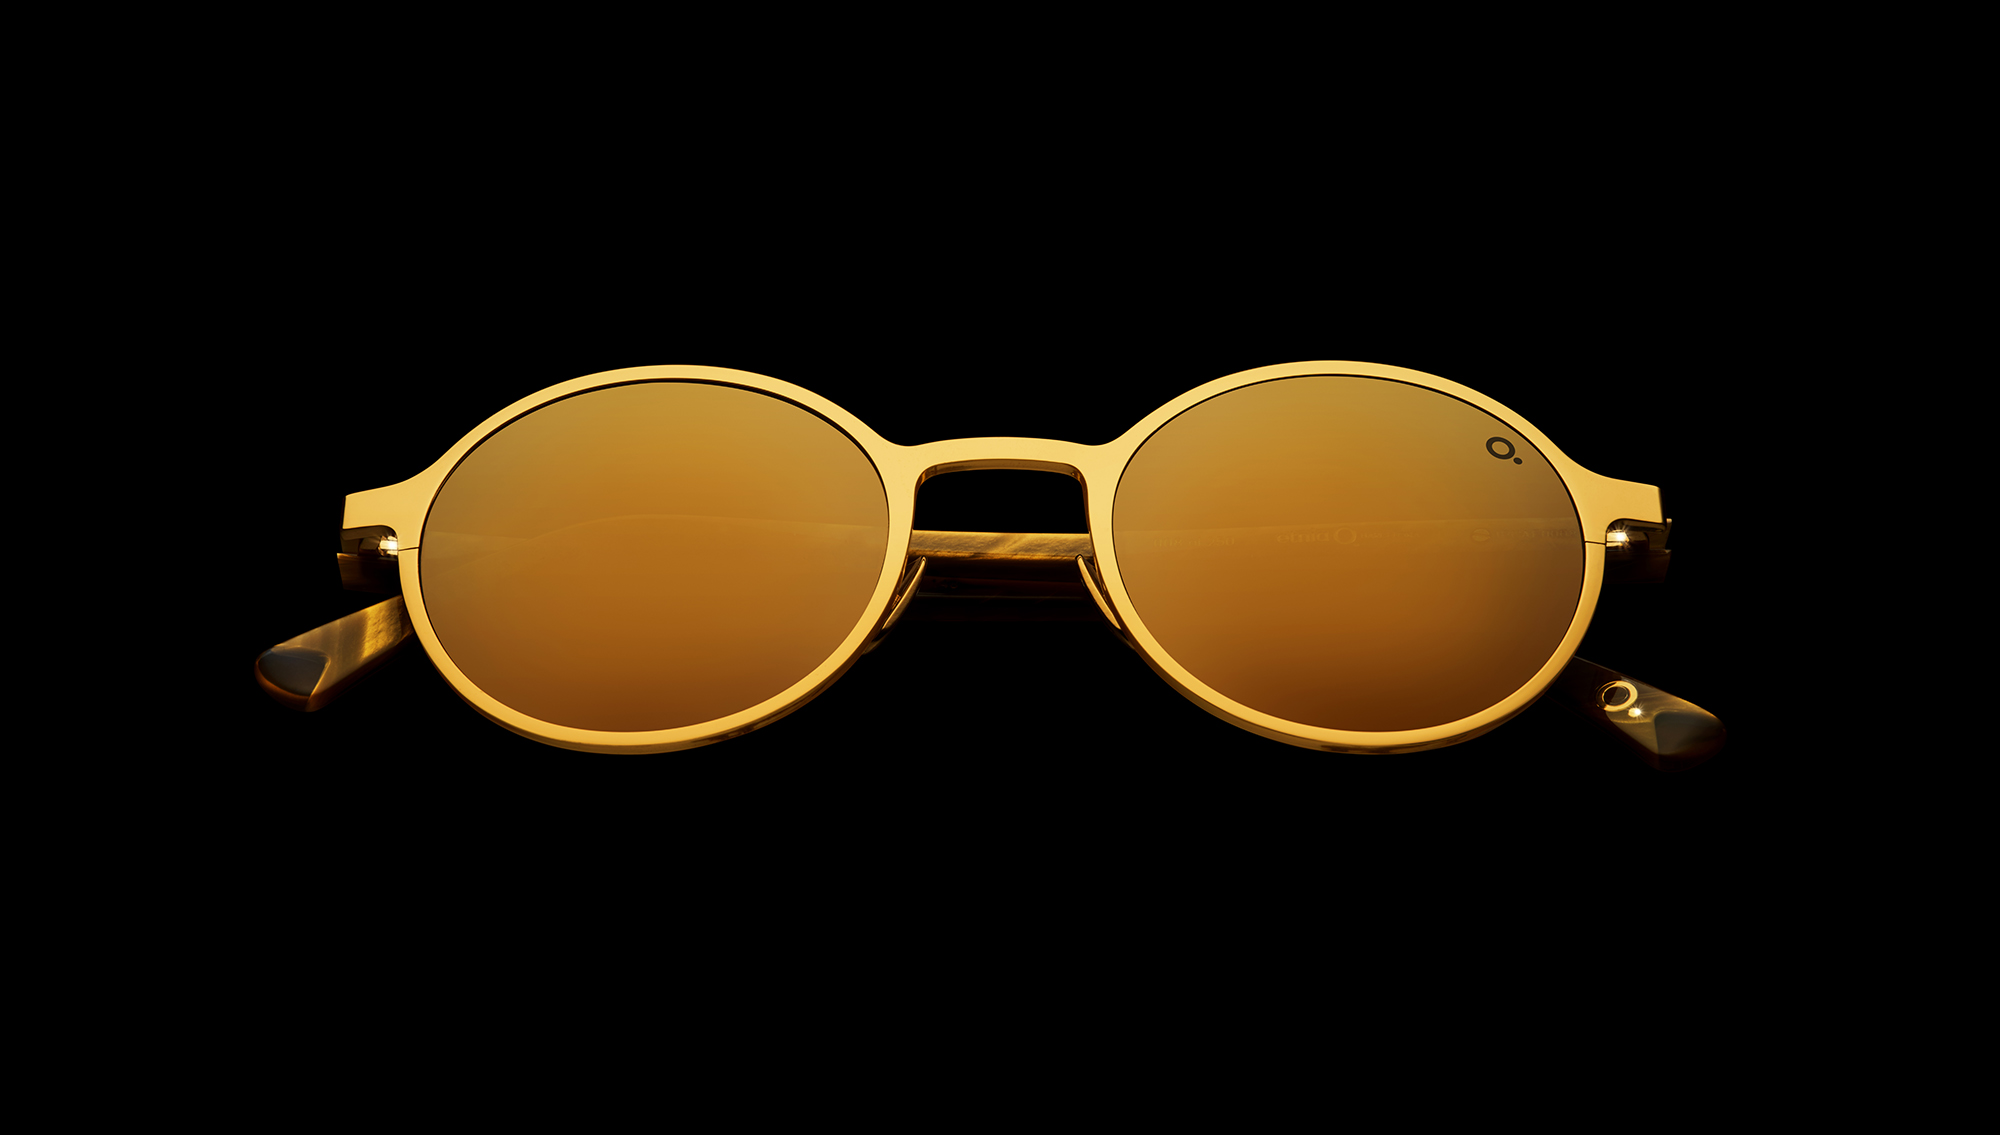 Yokohama 24k, crafted with titanium and plated in 24-karat gold.